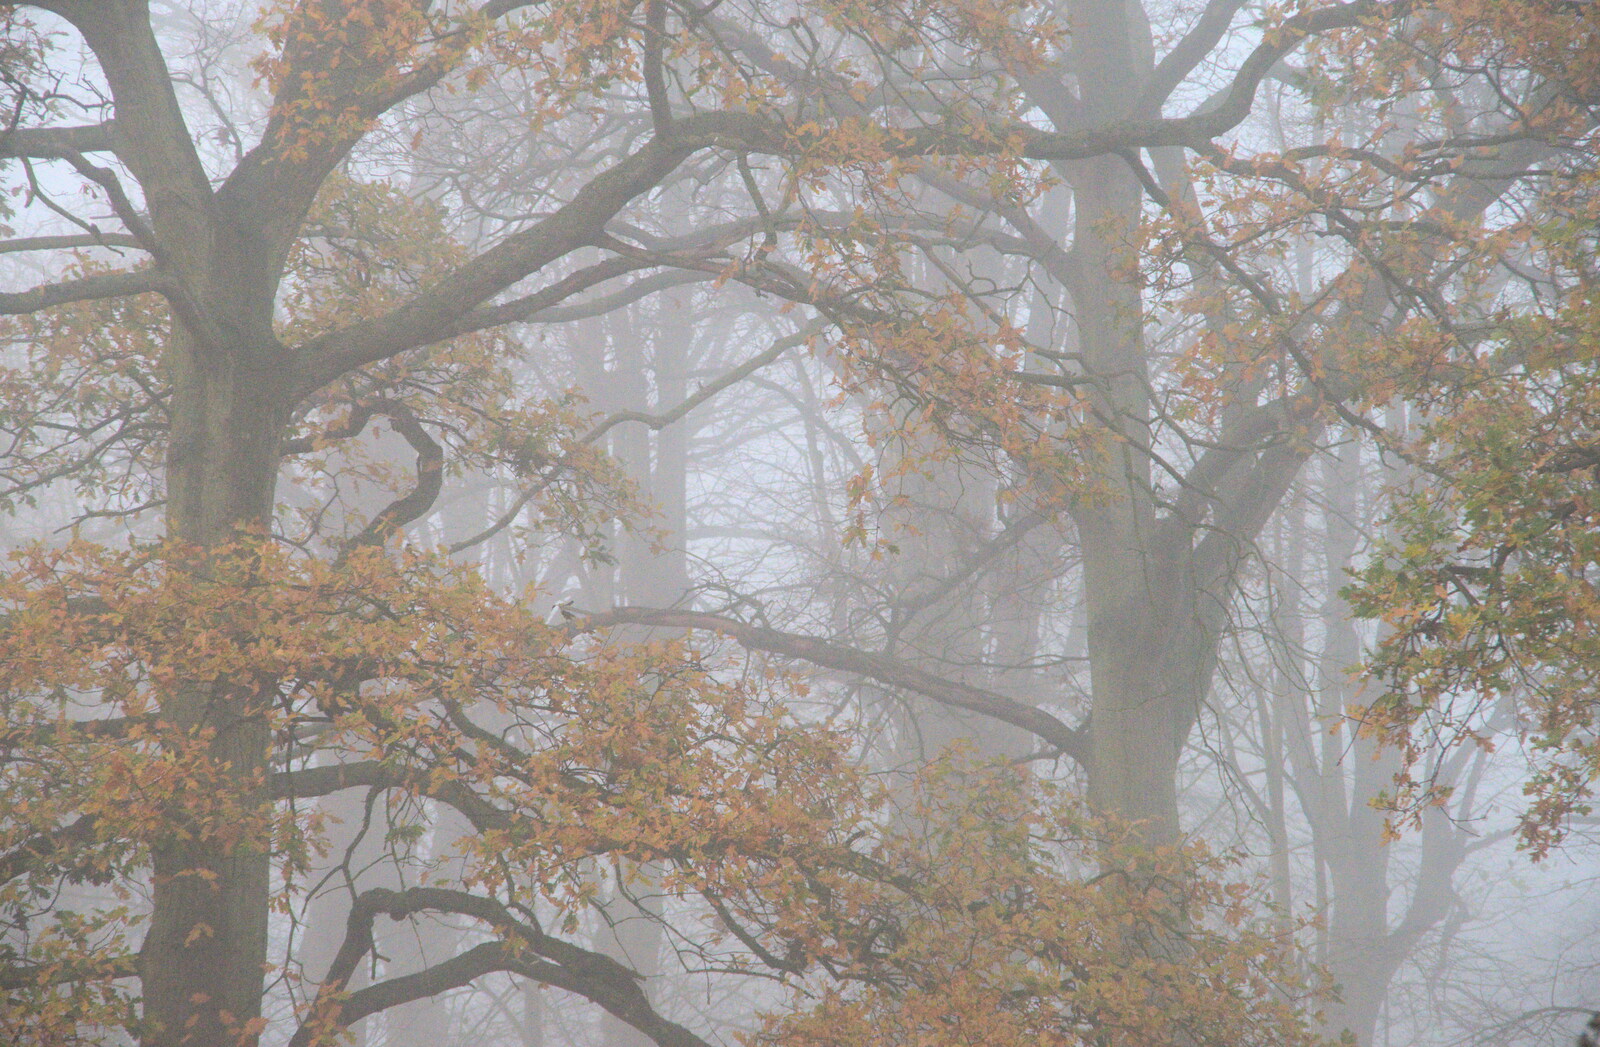 Mist around the Oaksmere's trees flattens the colours from A Return to the Oaksmere, Brome, Suffolk - 8th December 2020